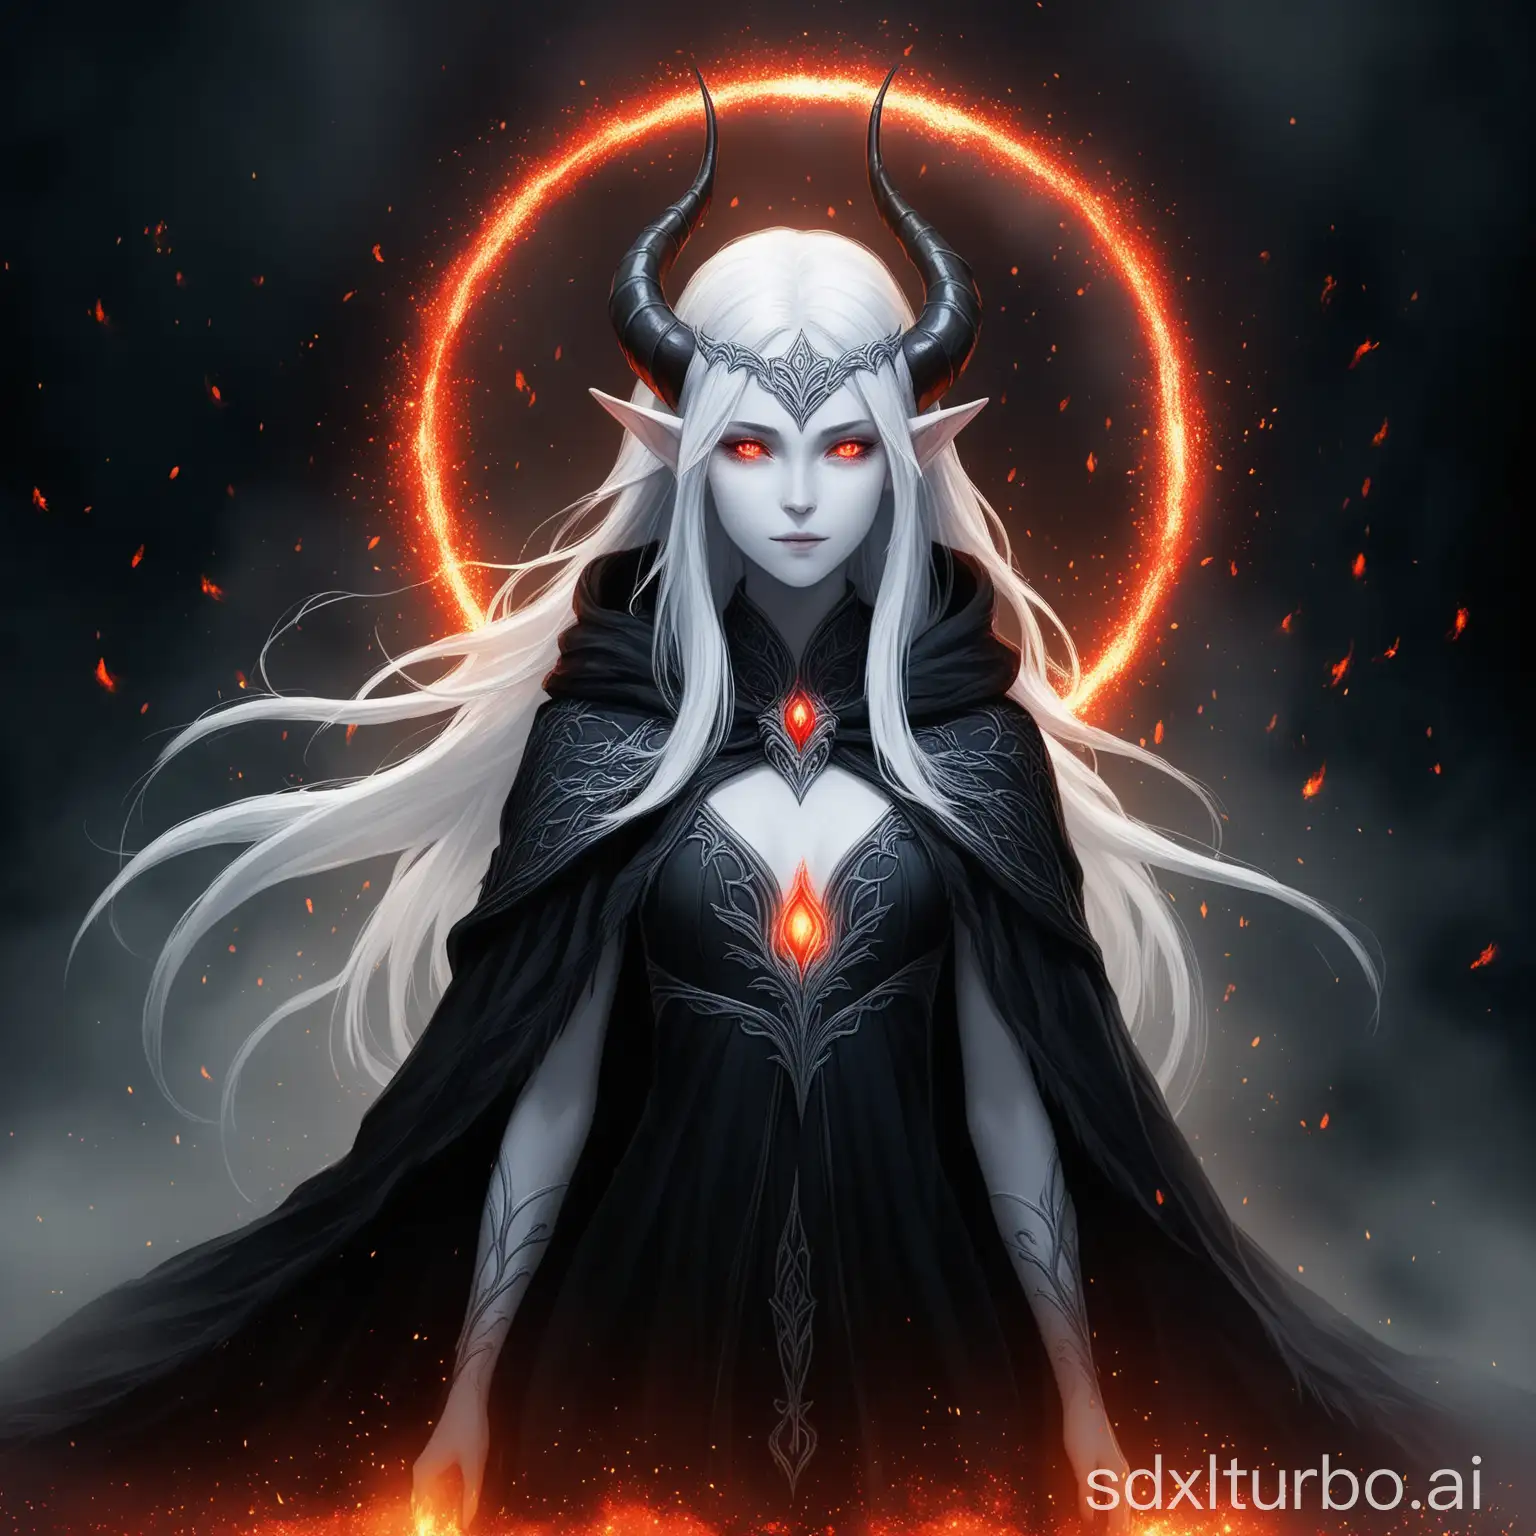 Mystical-Elven-Character-with-White-Hair-and-Black-Horn-in-Feathered-Cloak